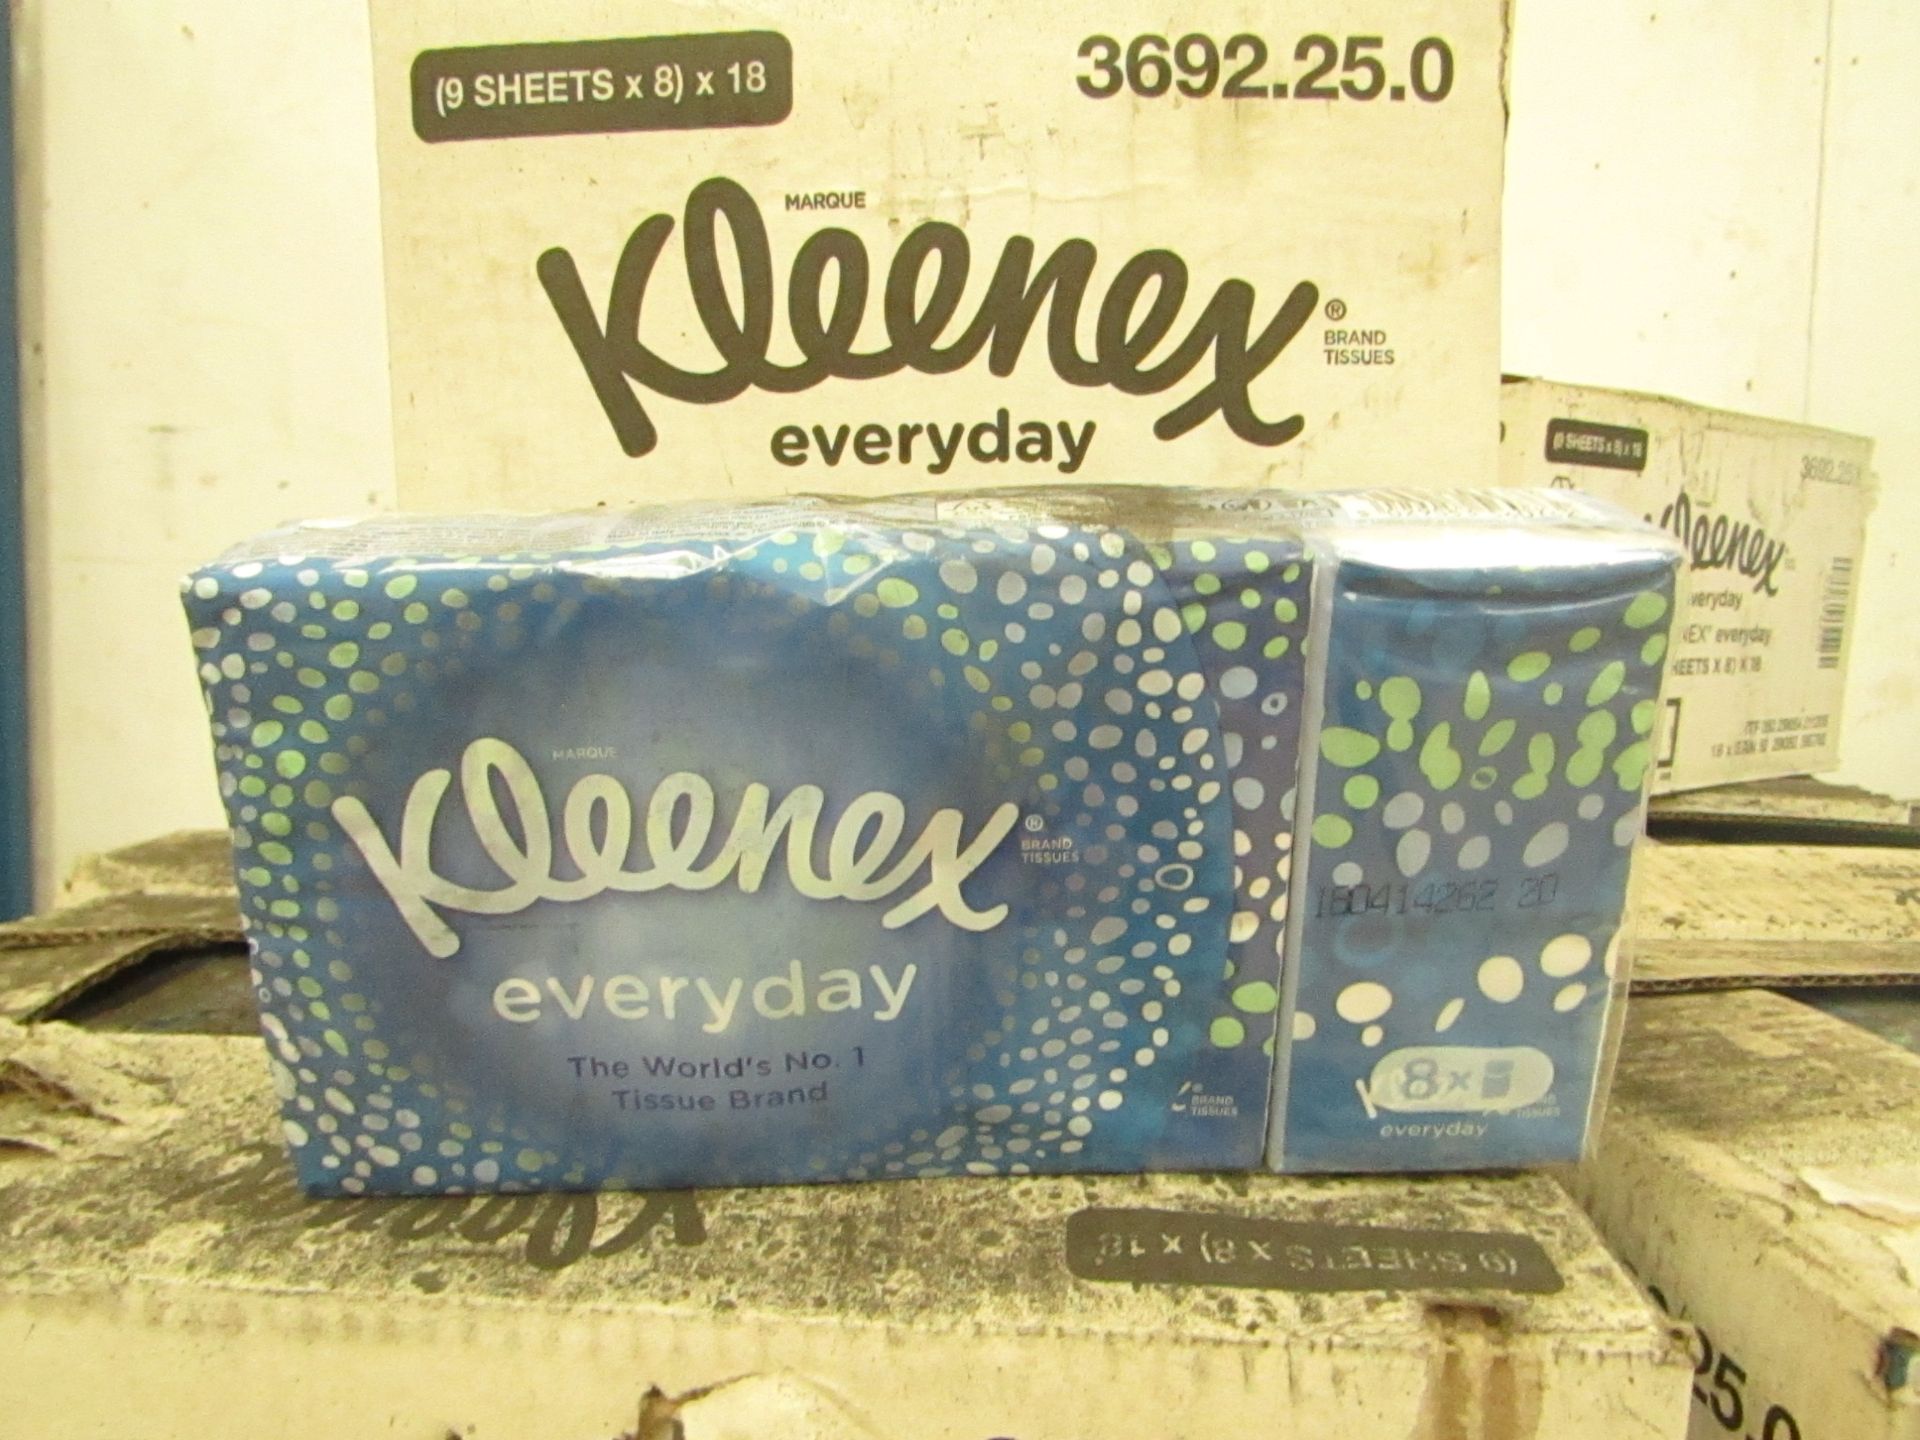 A Box Container 18x Packs Kleenex tissues, each pack has 8 packs of 9 sheets in them, the outer